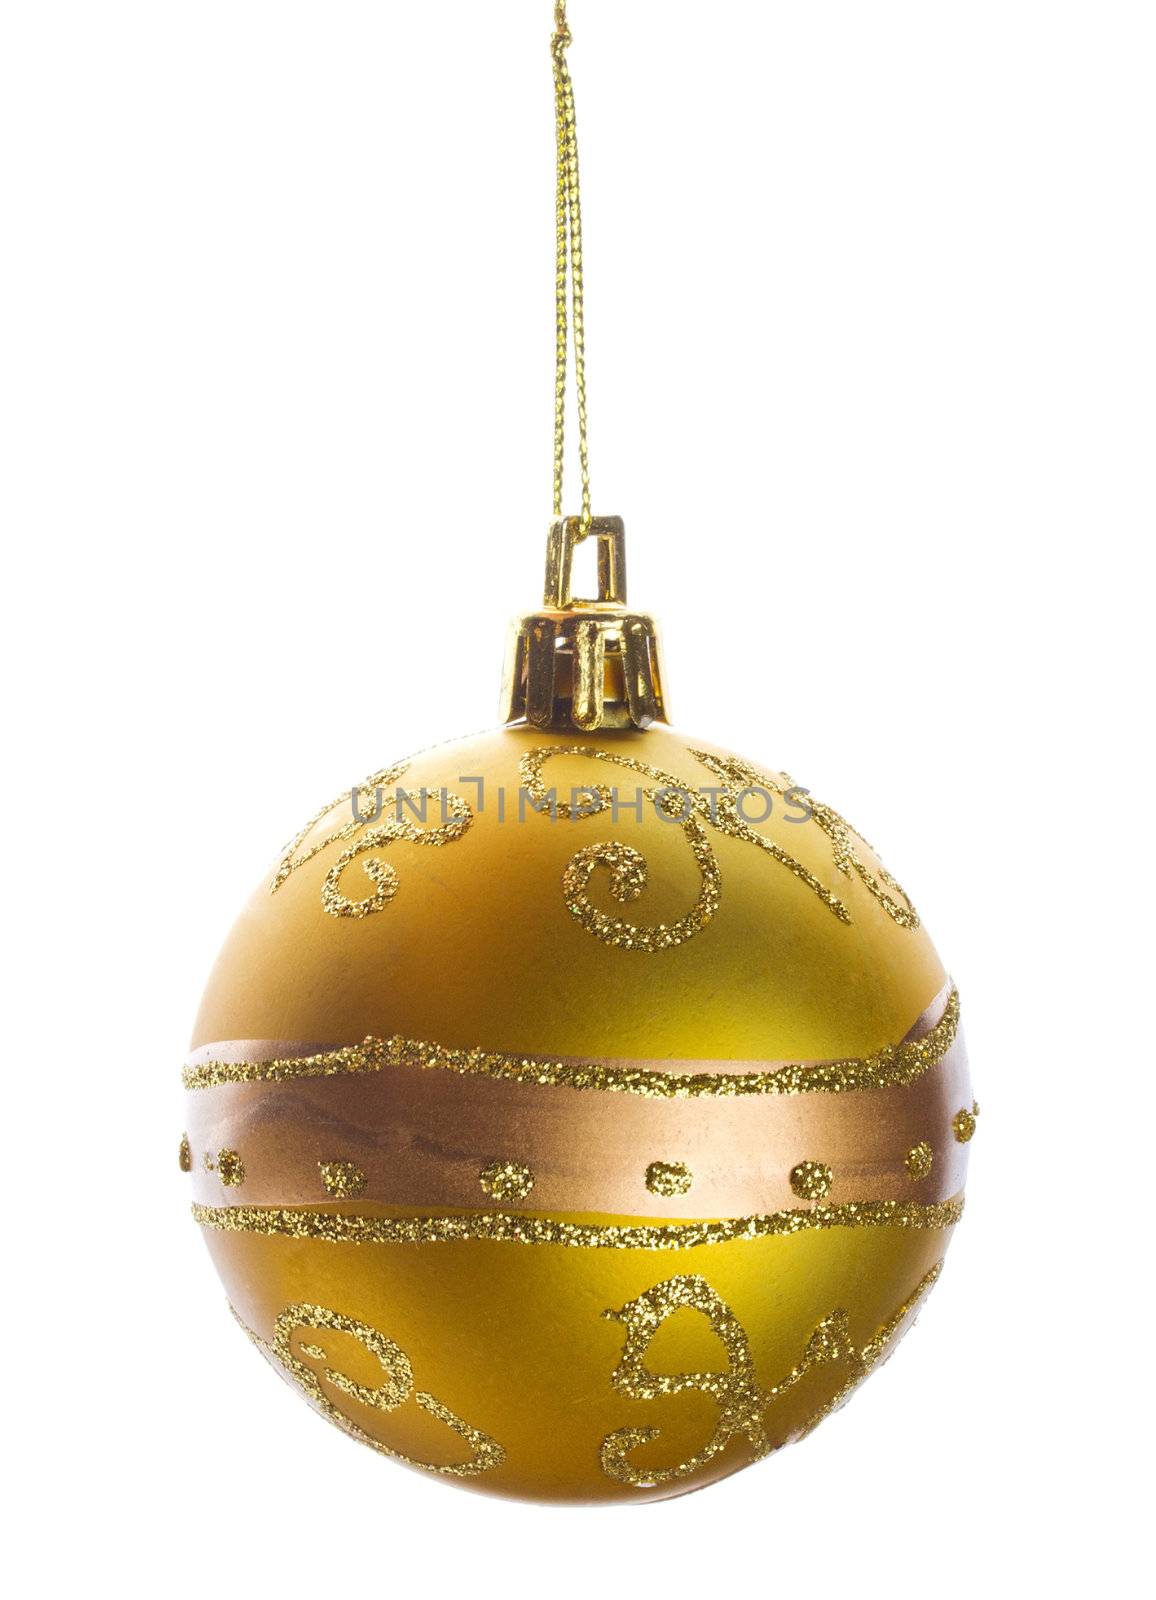 golden christmas ball by Alekcey